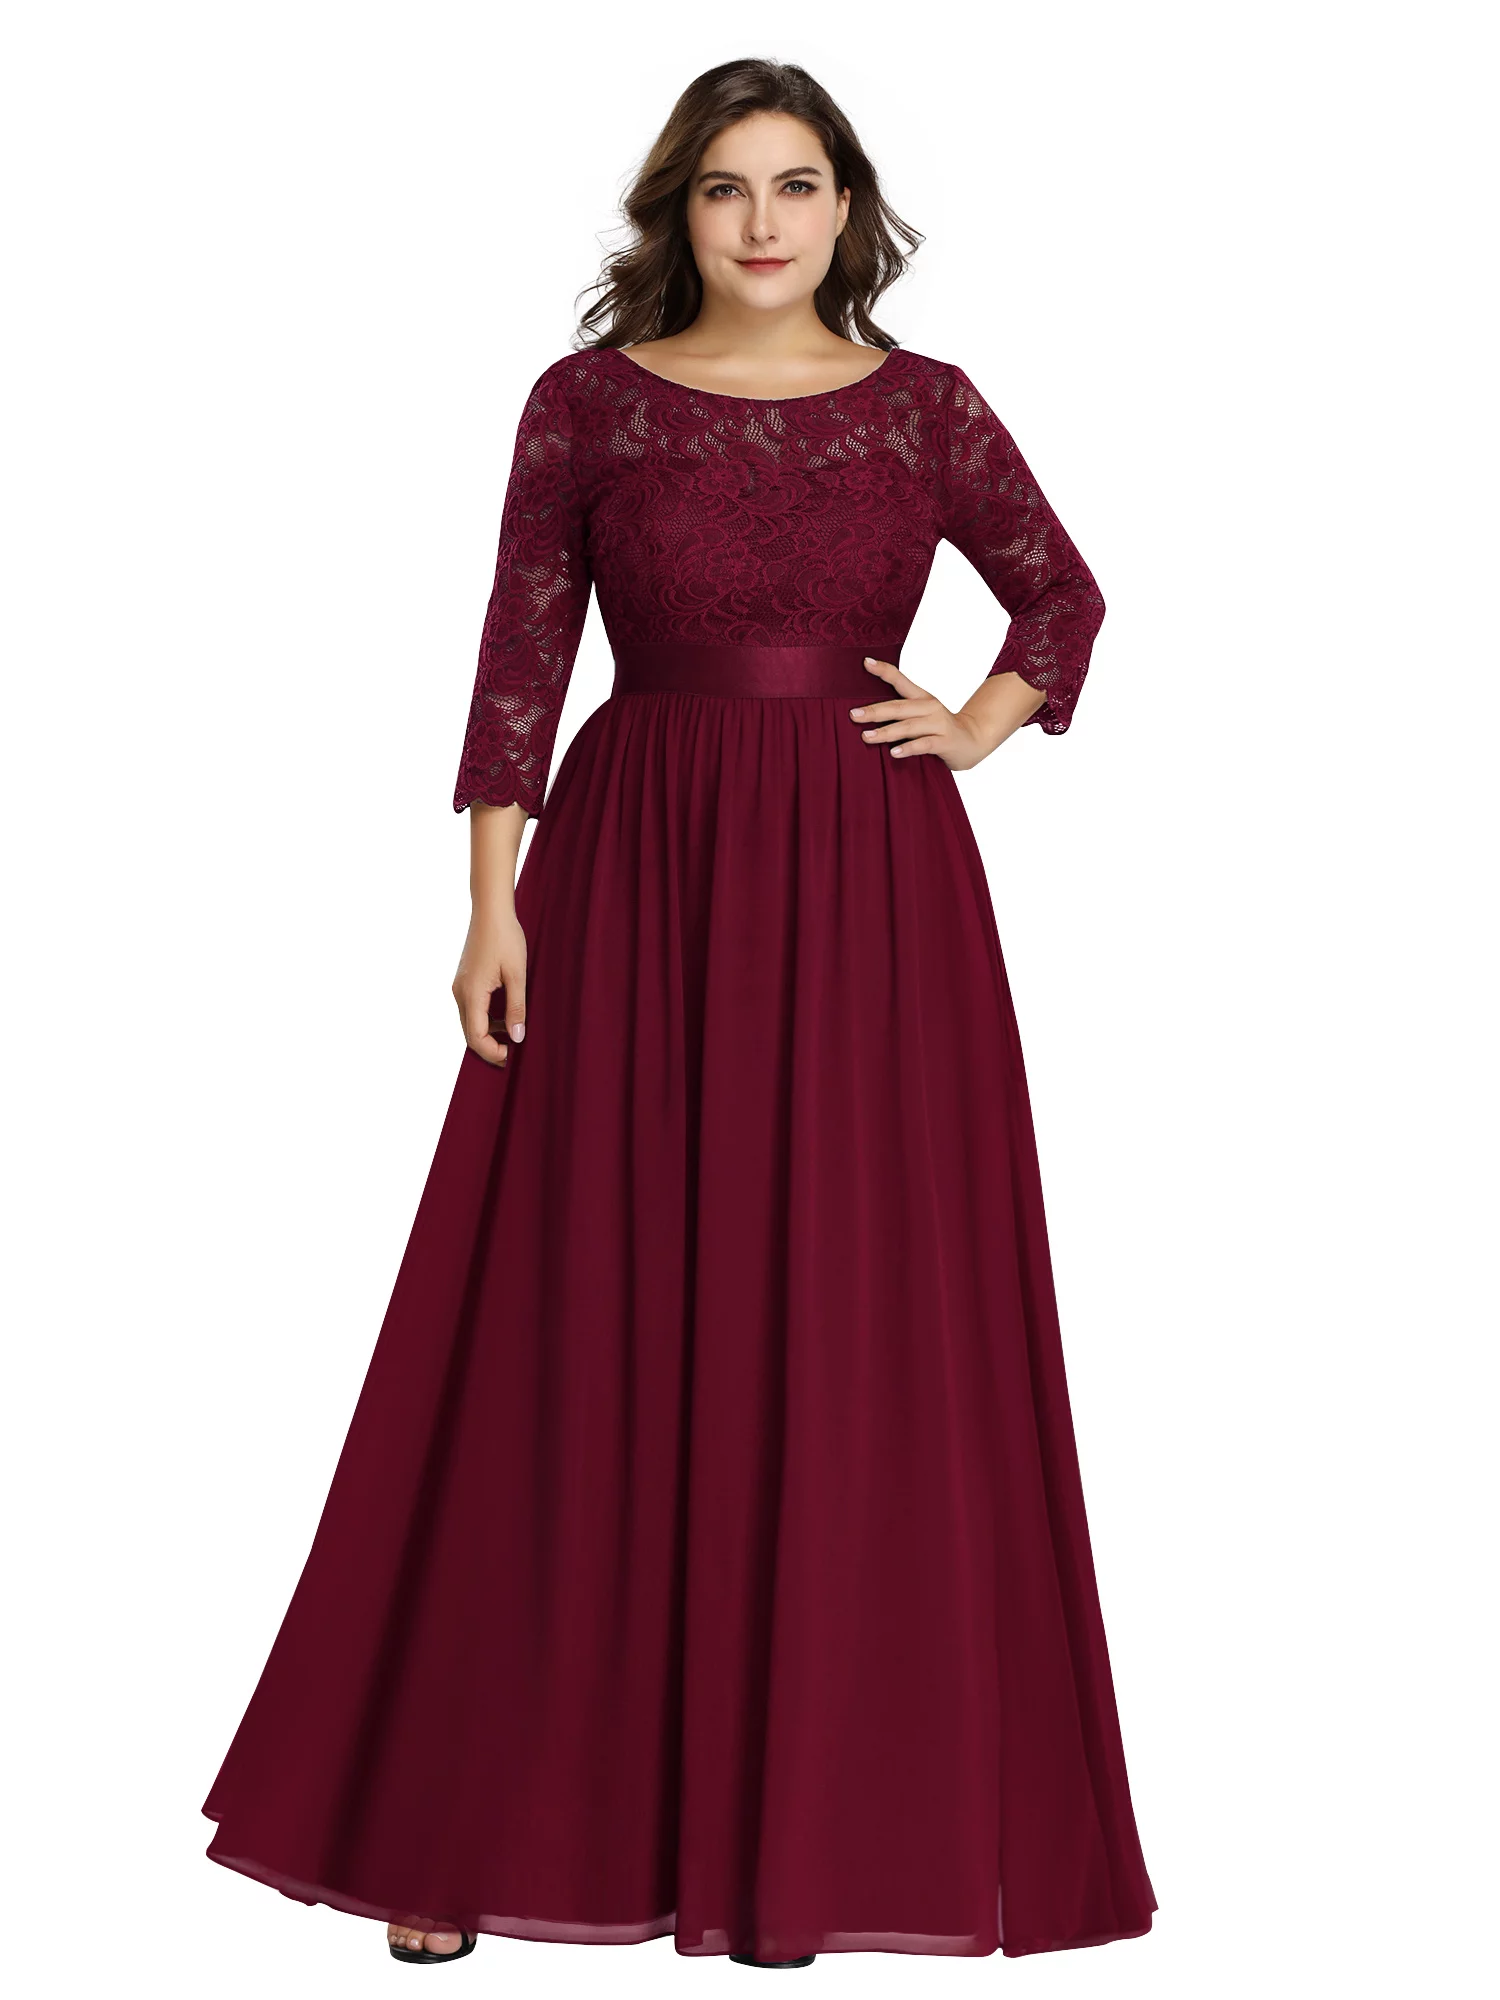 Ever-Pretty Womens Floral Lace Long Sleeve Bridesmaid Dresses for Women 74122 Burgundy US4